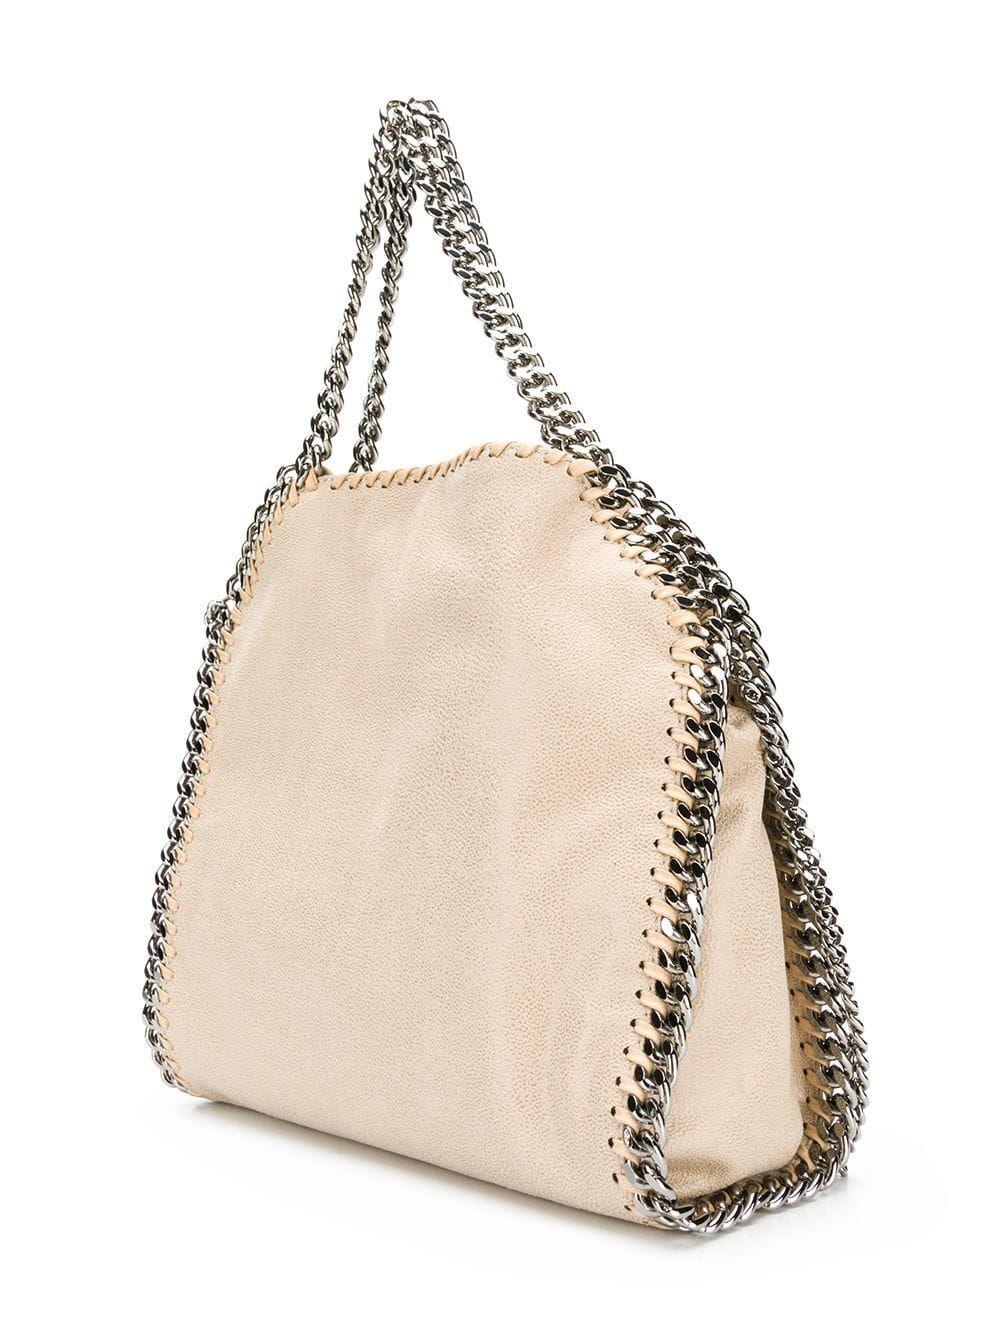 Stella McCartney Synthetic Polyester Handbag in Beige (Natural) - Lyst